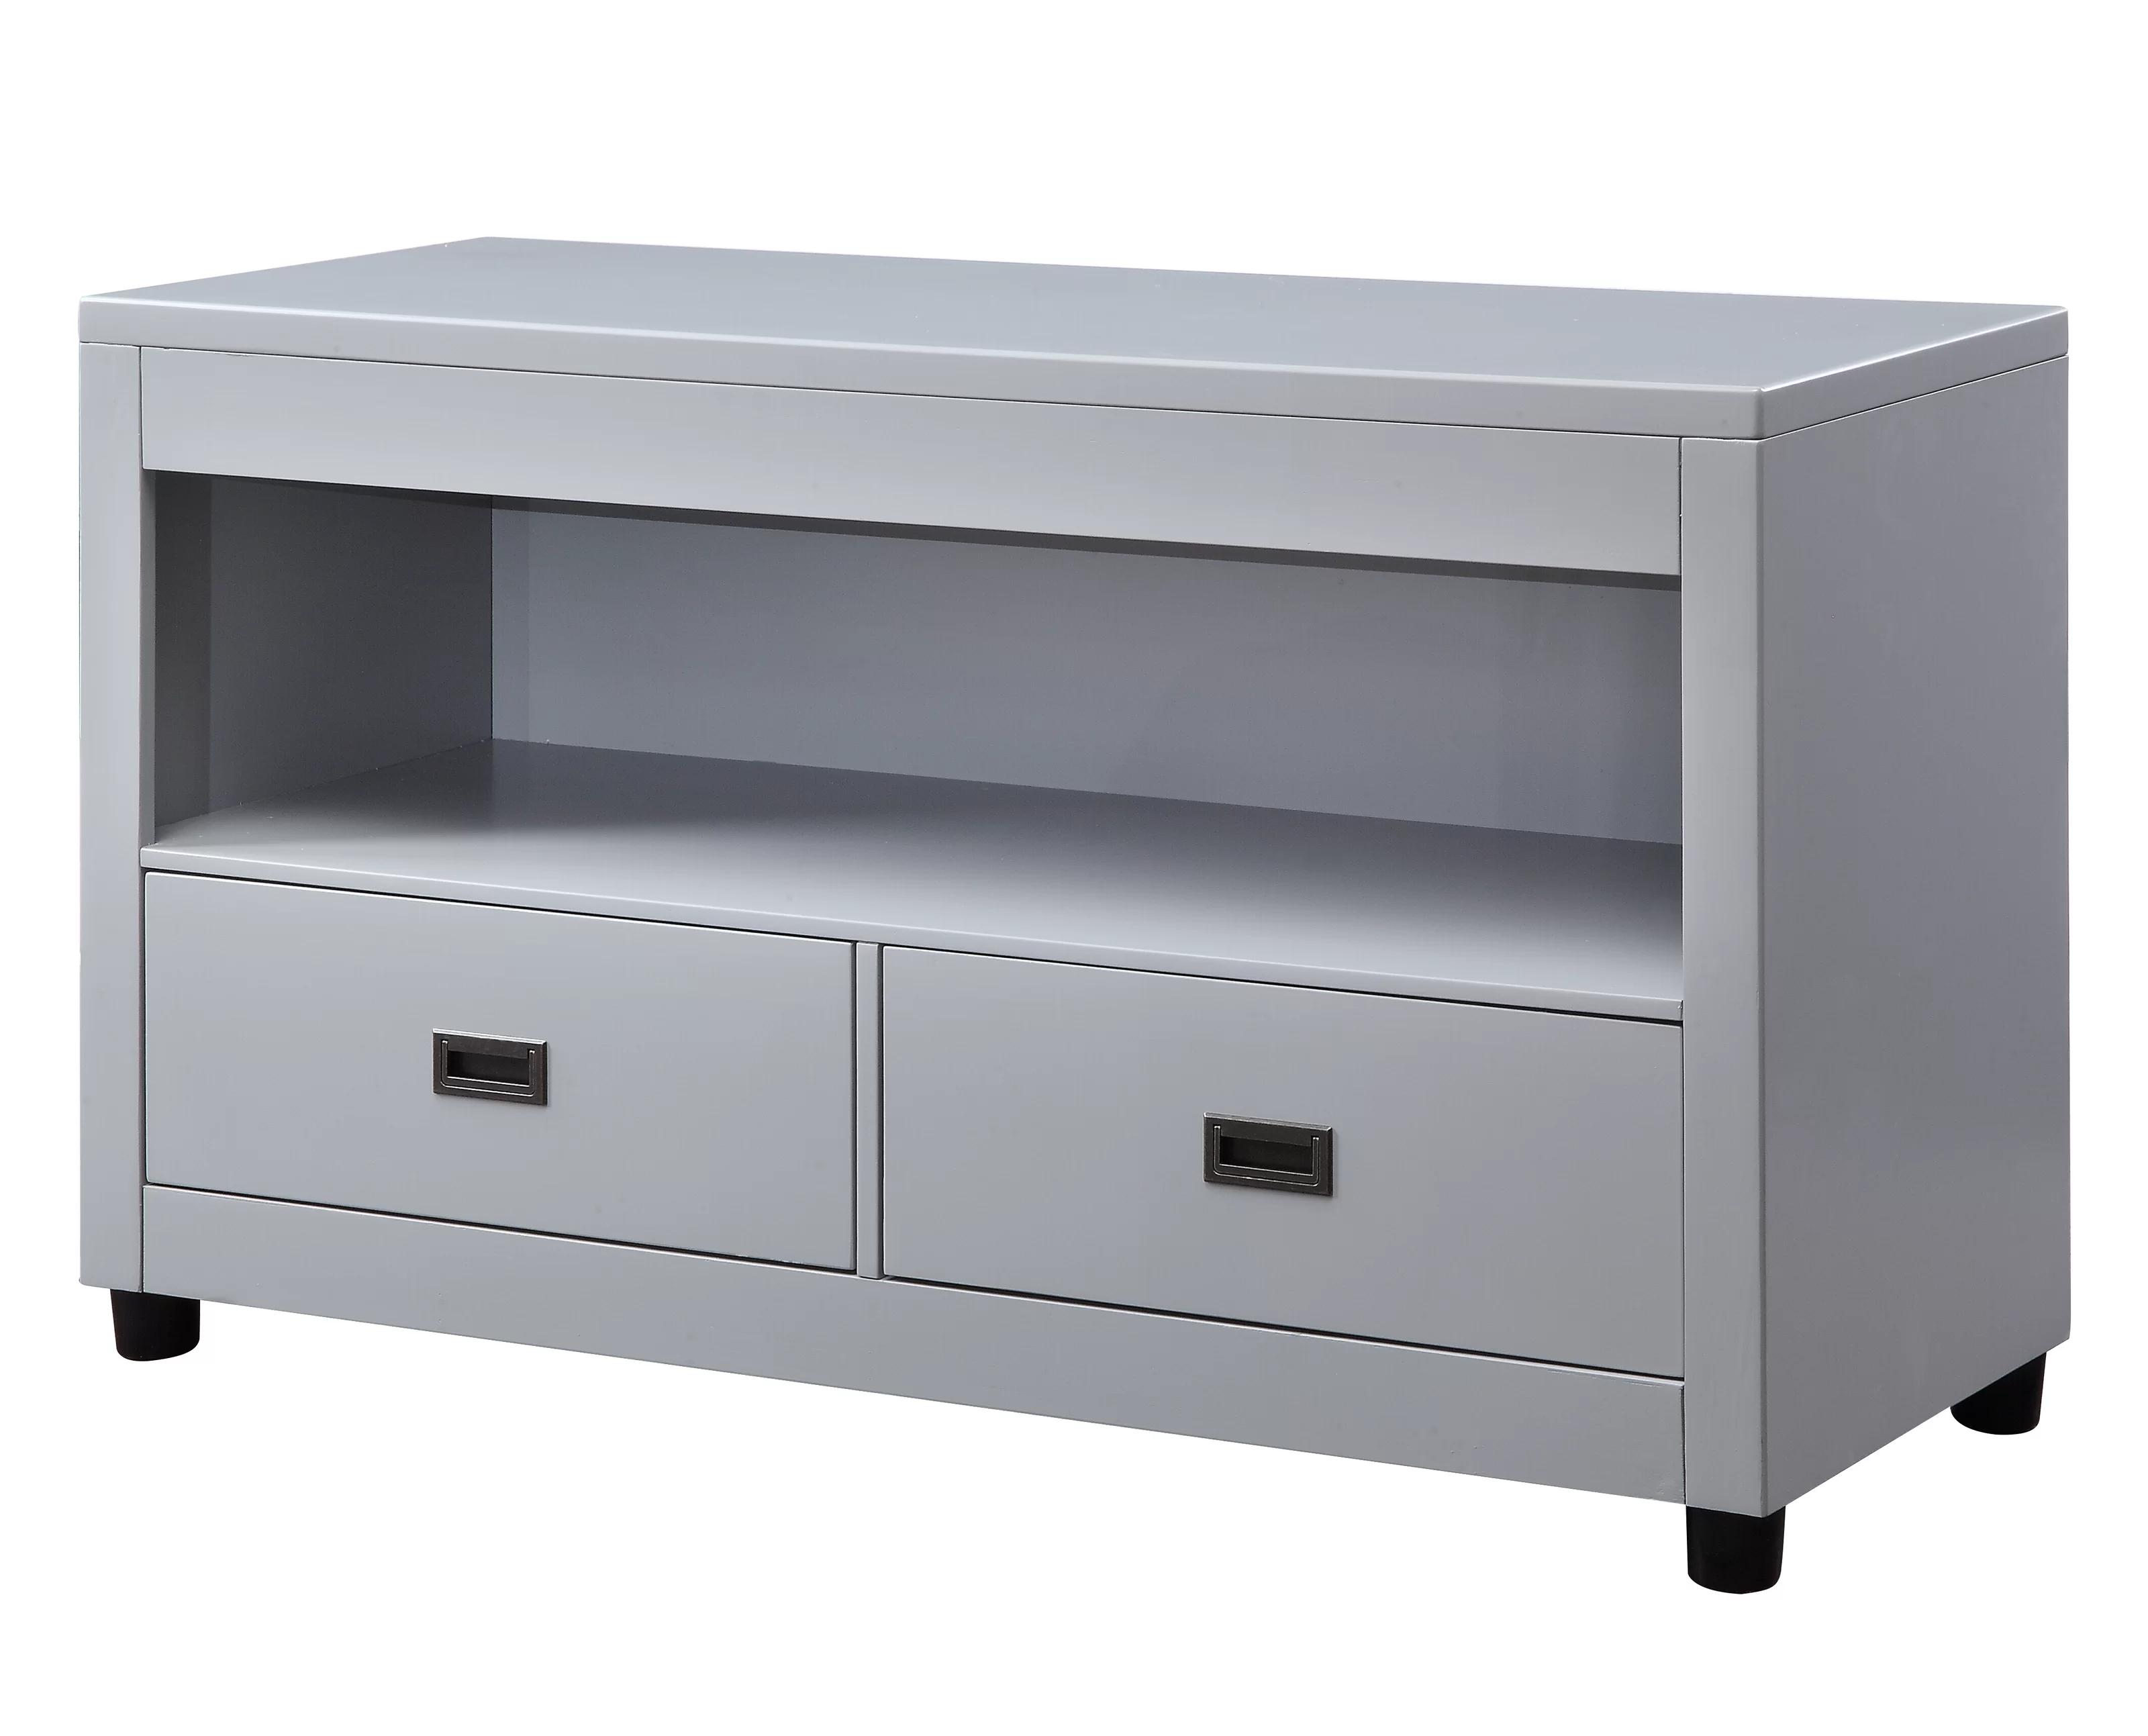 Transitional Sofa Table Eleanor 87108 in Gray 